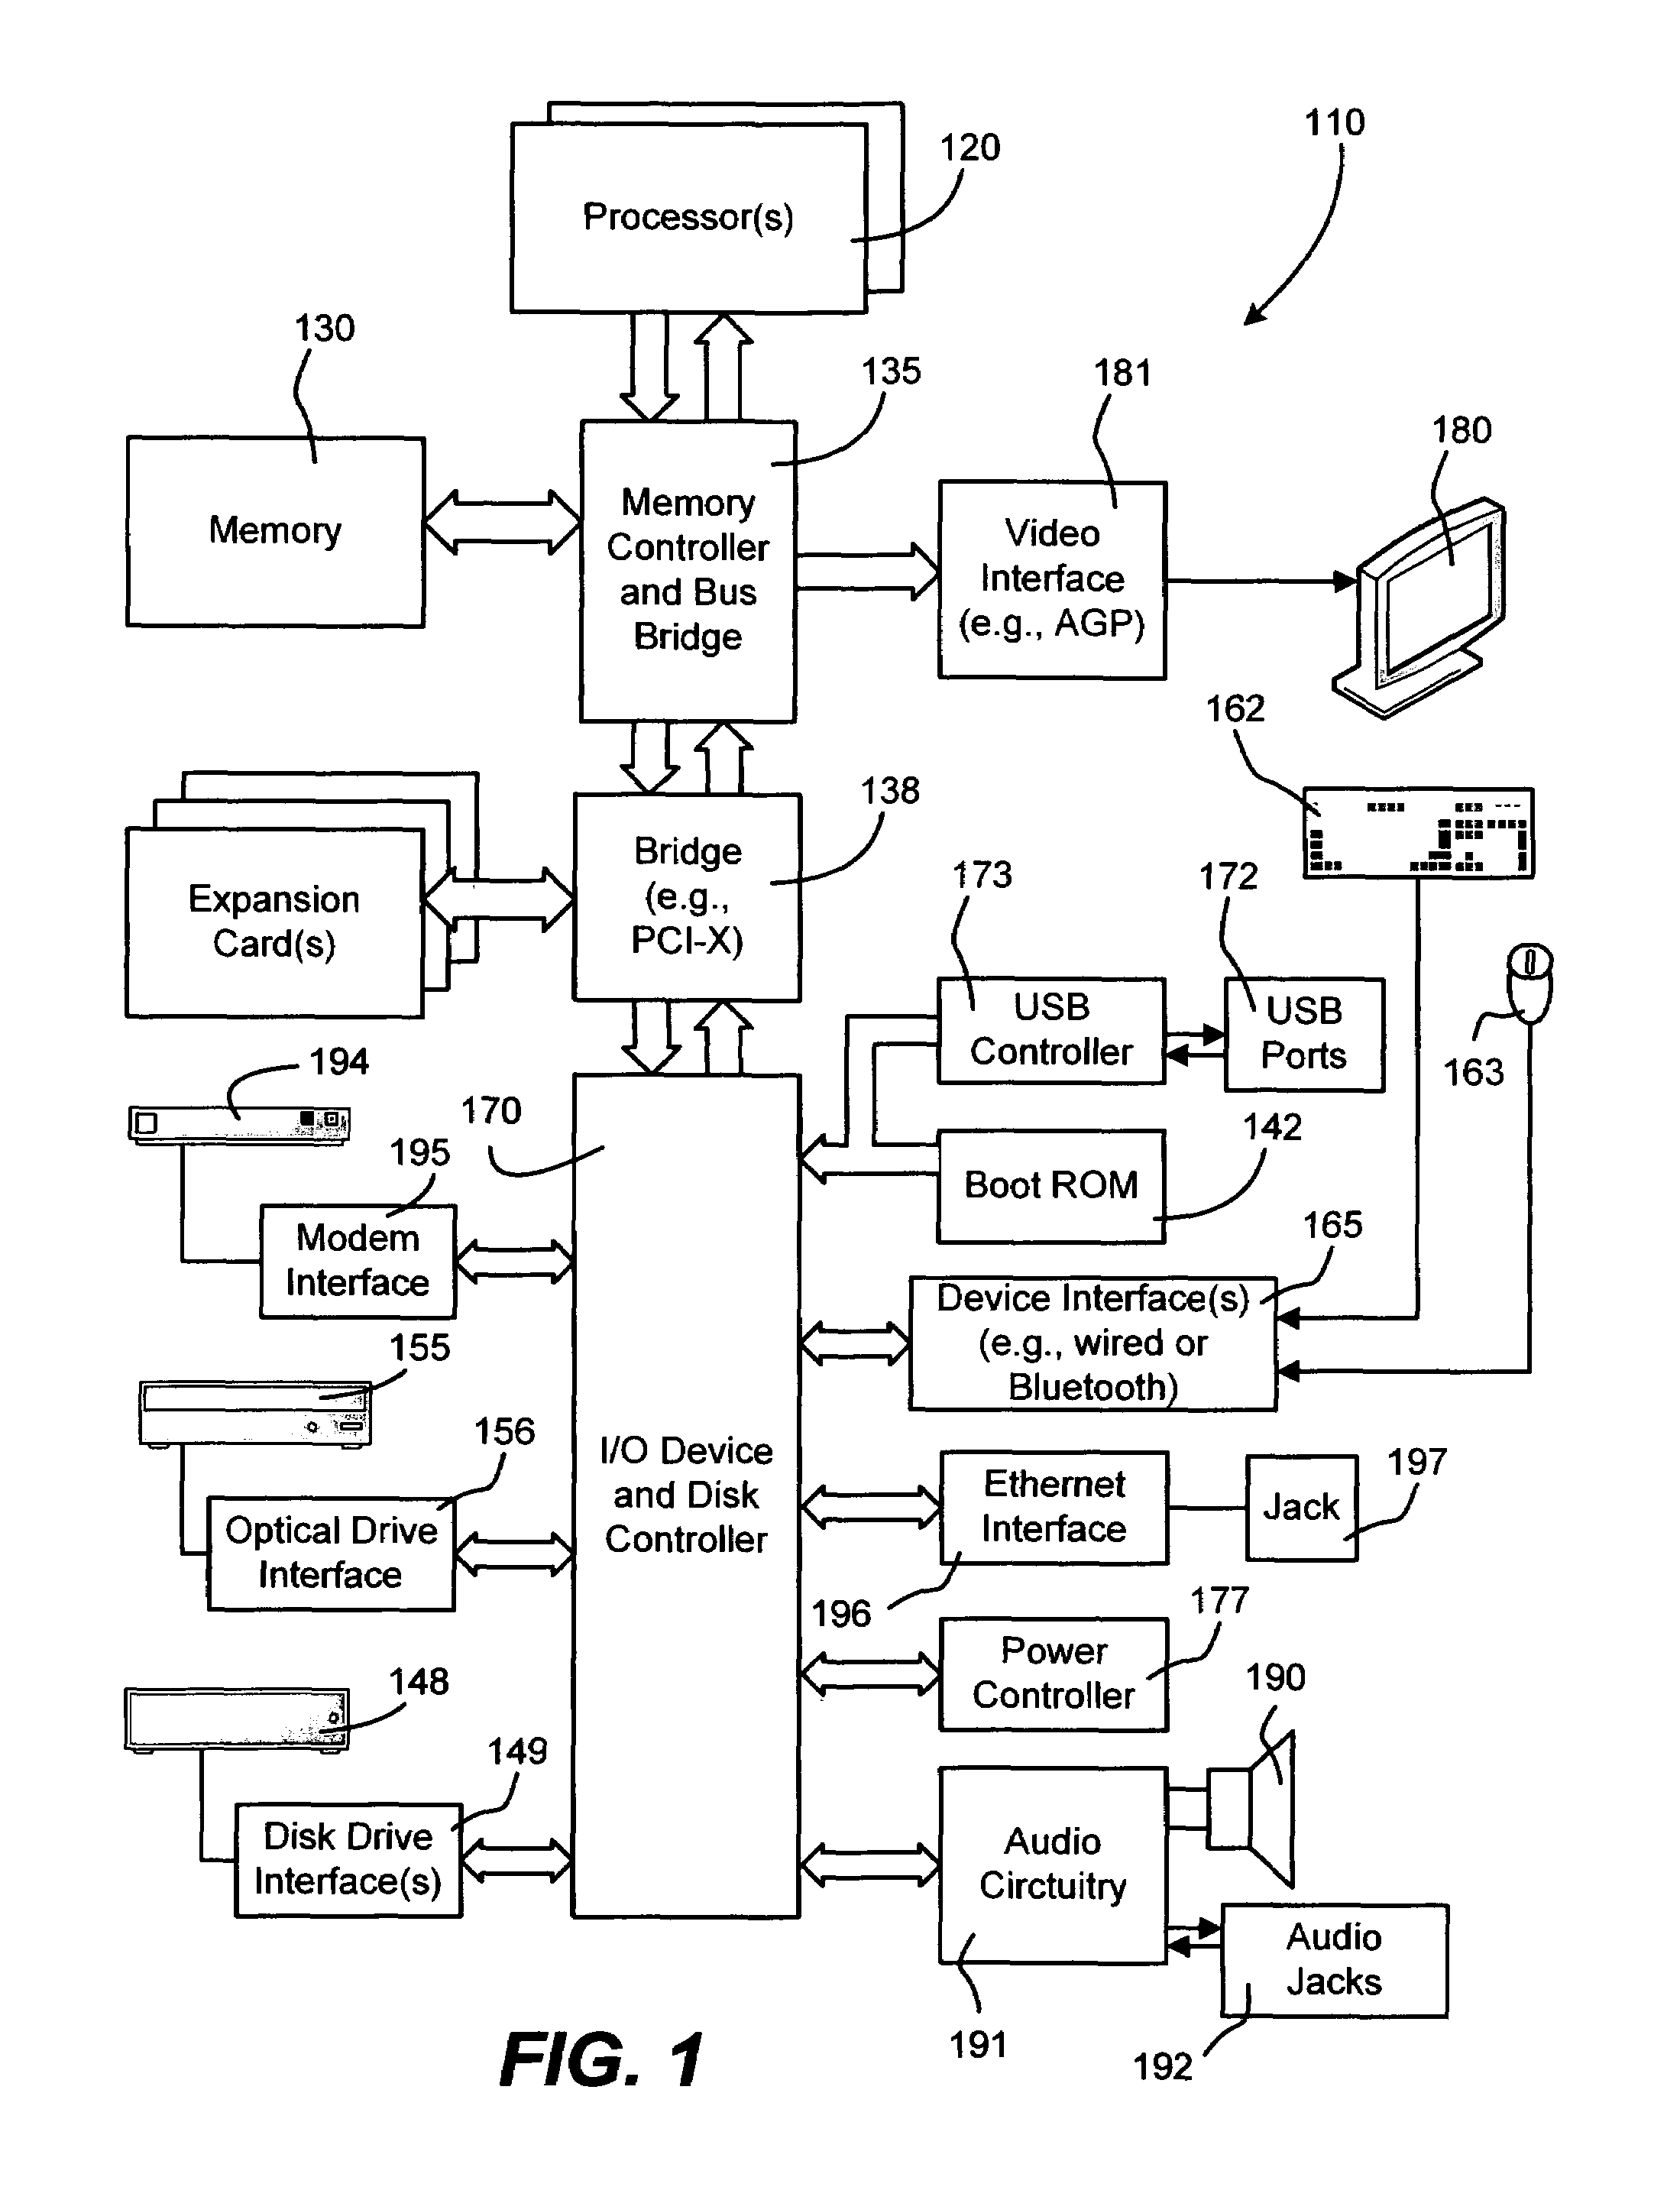 Method and system for dynamically patching an operating system's interrupt mechanism